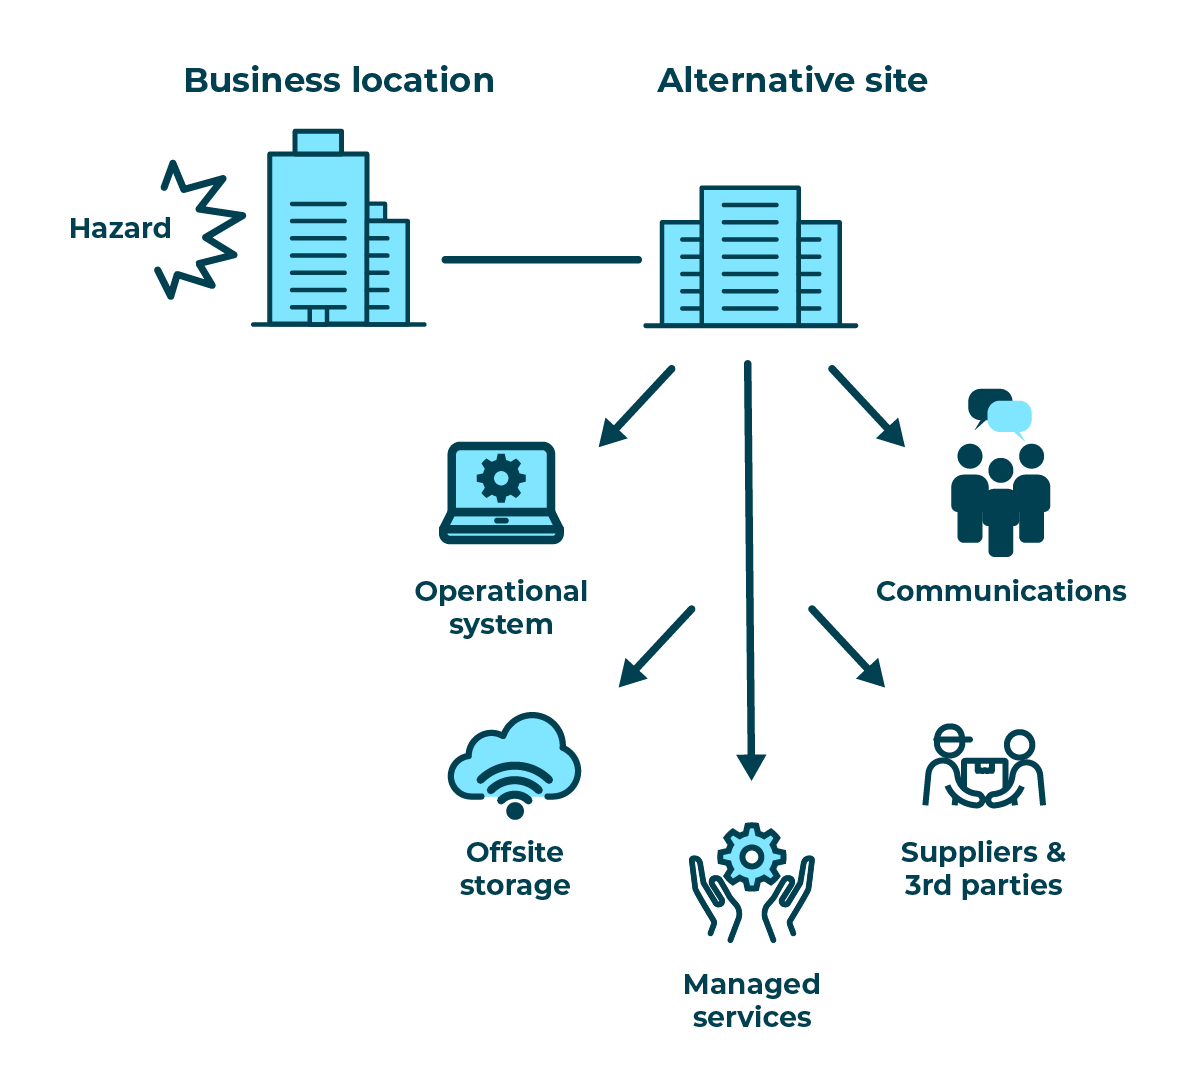 A diagram illustrating some key considerations of disaster recovery plans, such as moving to an alternative site, with access to operational systems, offsite storage, managed services, suppliers and third parties, and alternative means of communication.